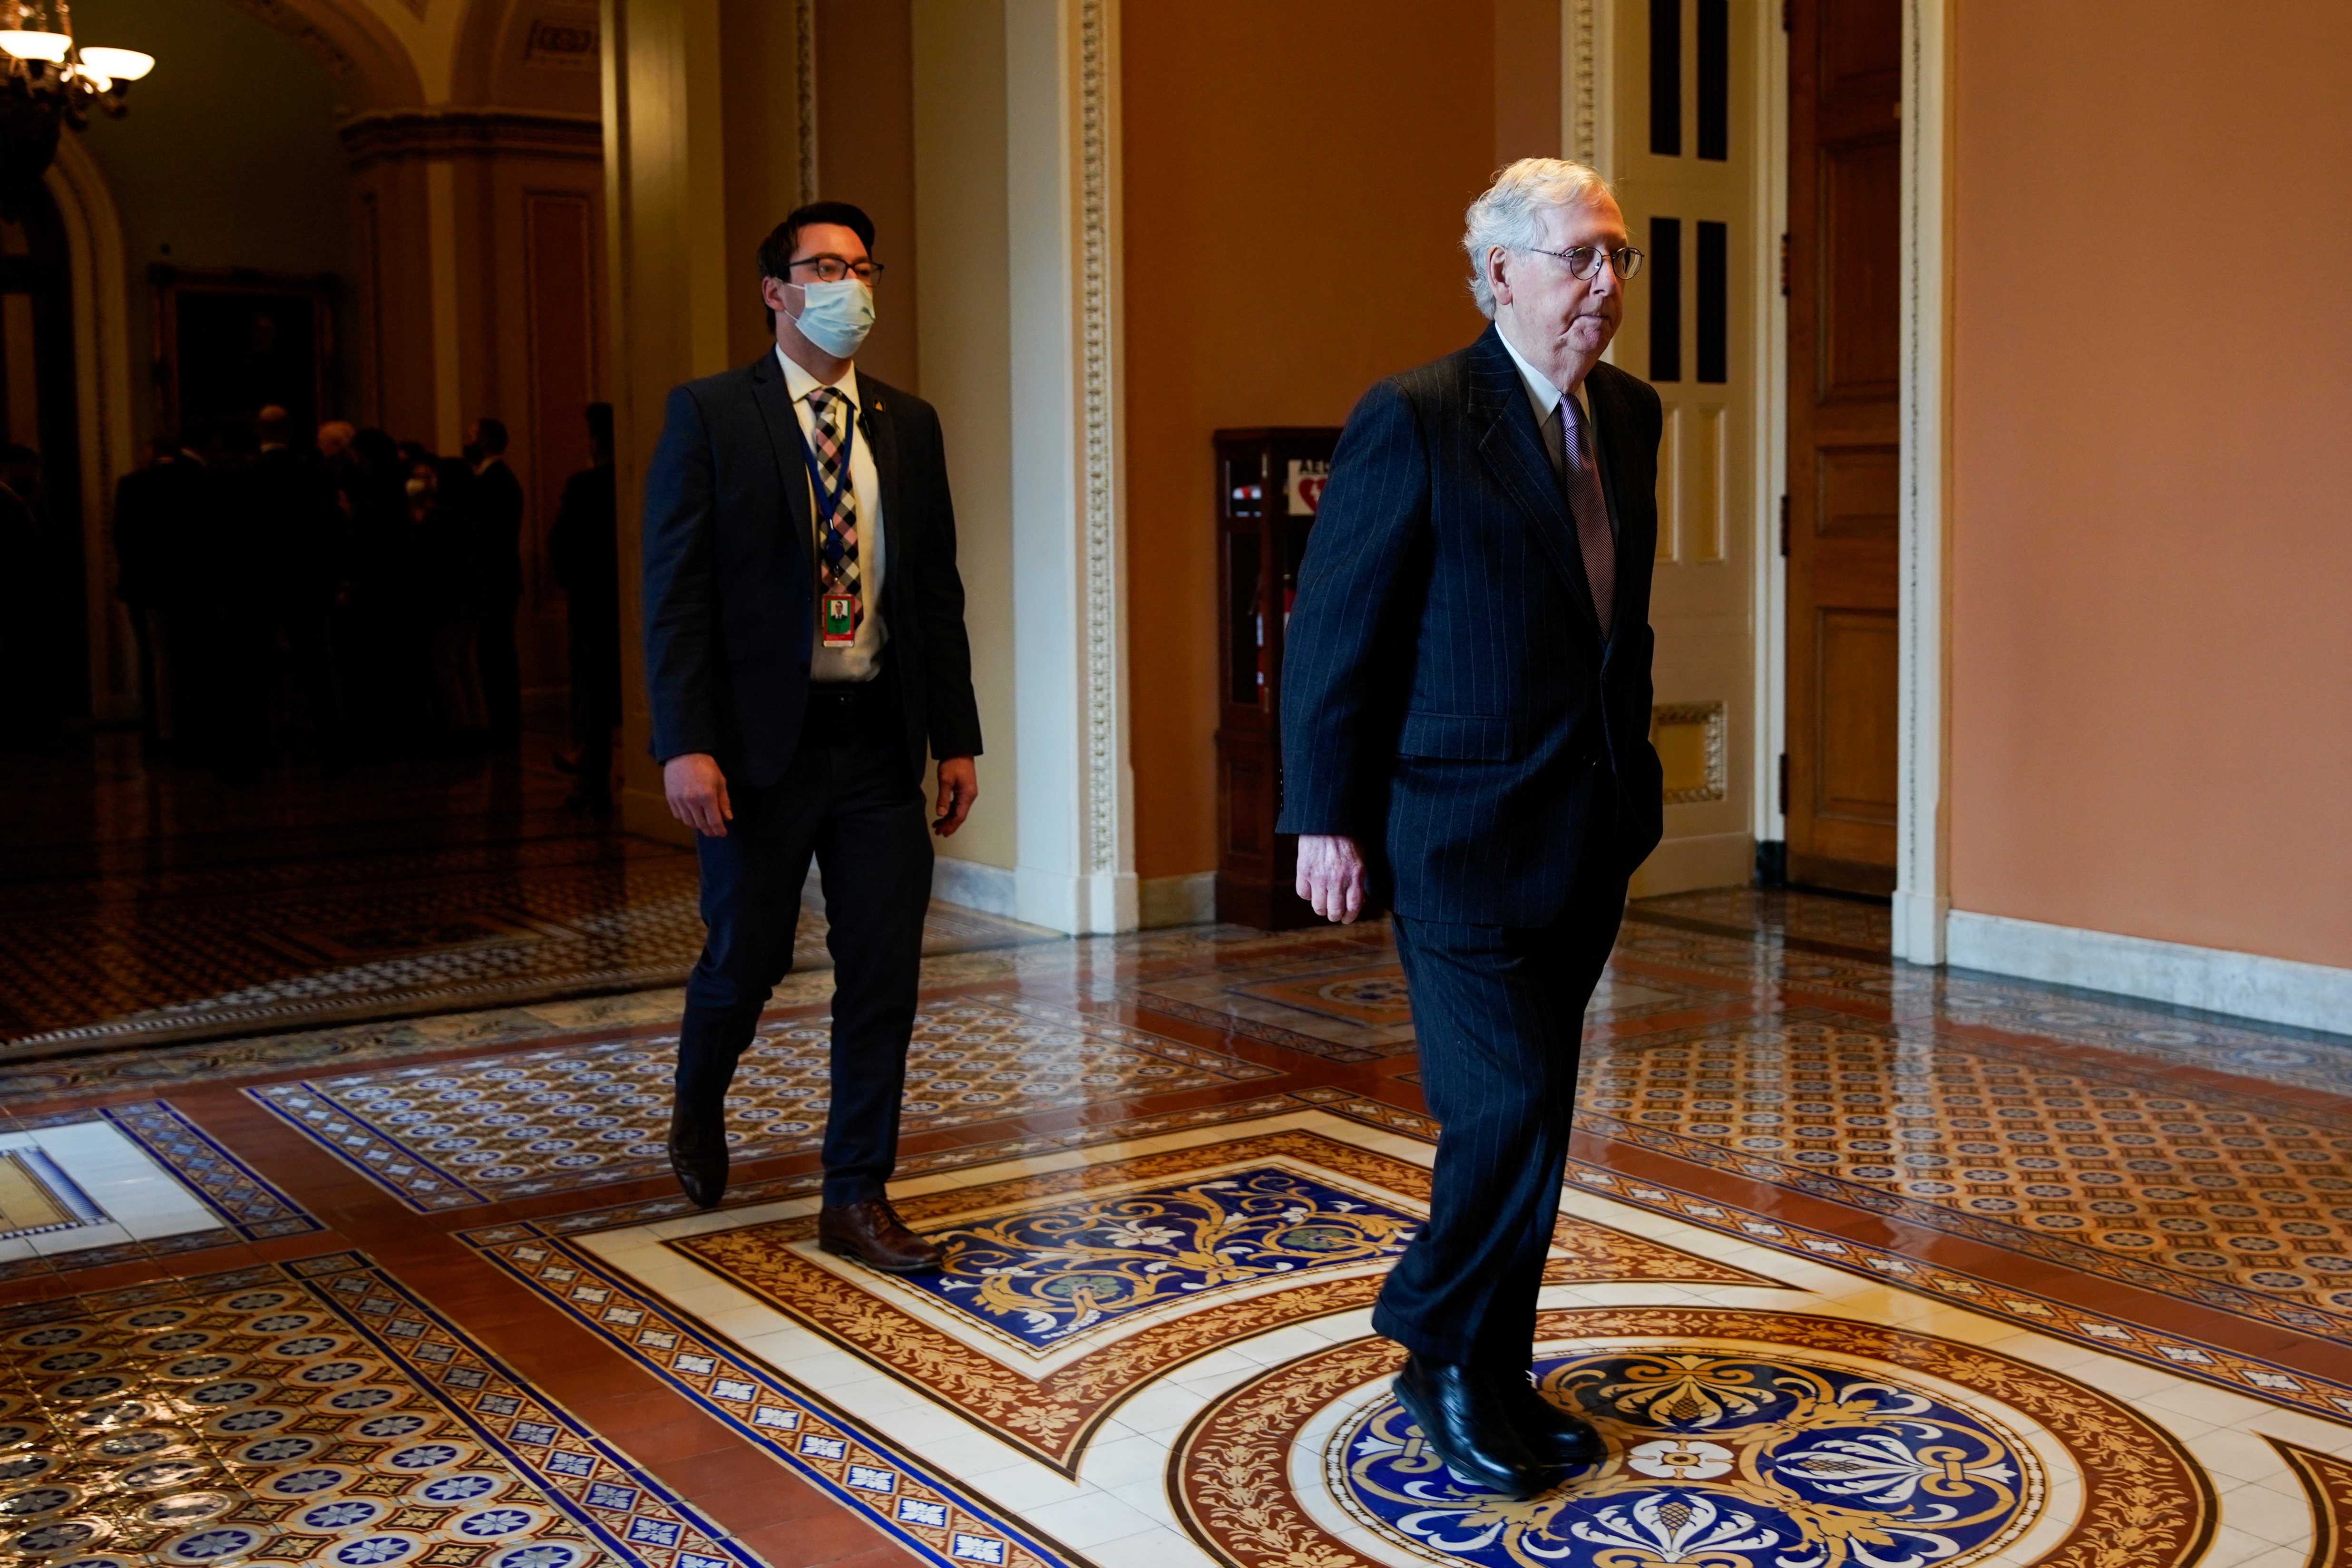 U.S. Senate Minority Leader Mitch McConnell (R-KY) walks back to his office at the U.S. Capitol in Washington